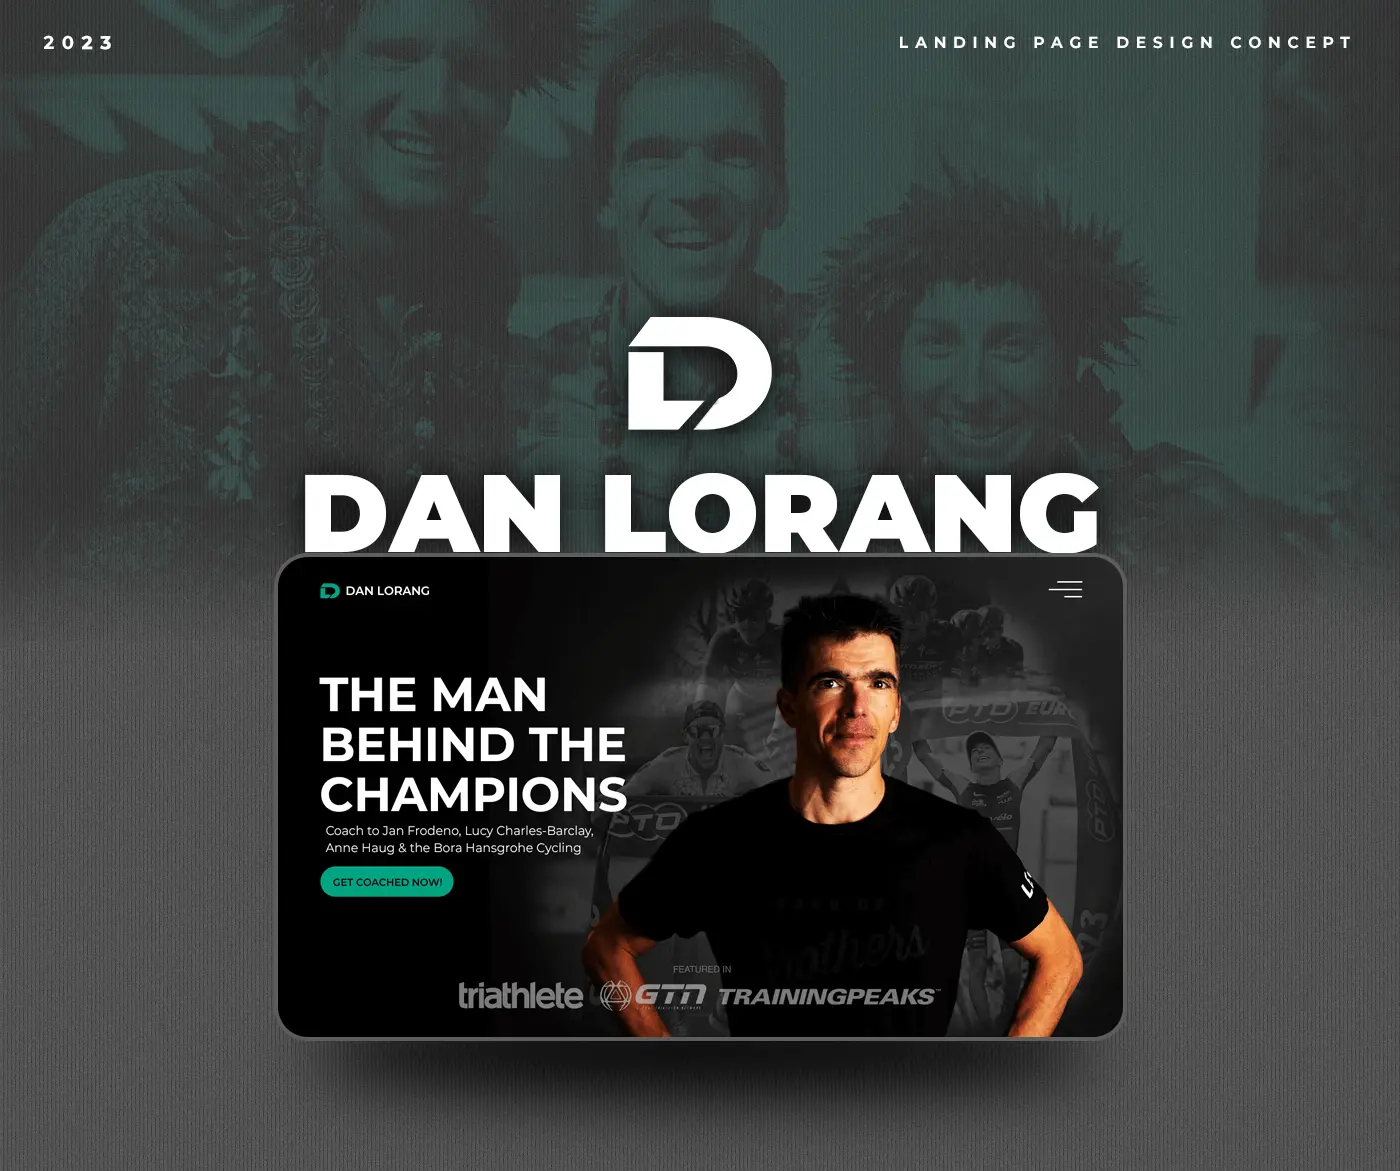 Dan Lorang - Coach to Jan Frodeno, Lucy Charles-Barclay, Anne Haug & the Bora Hansgrohe Cycling